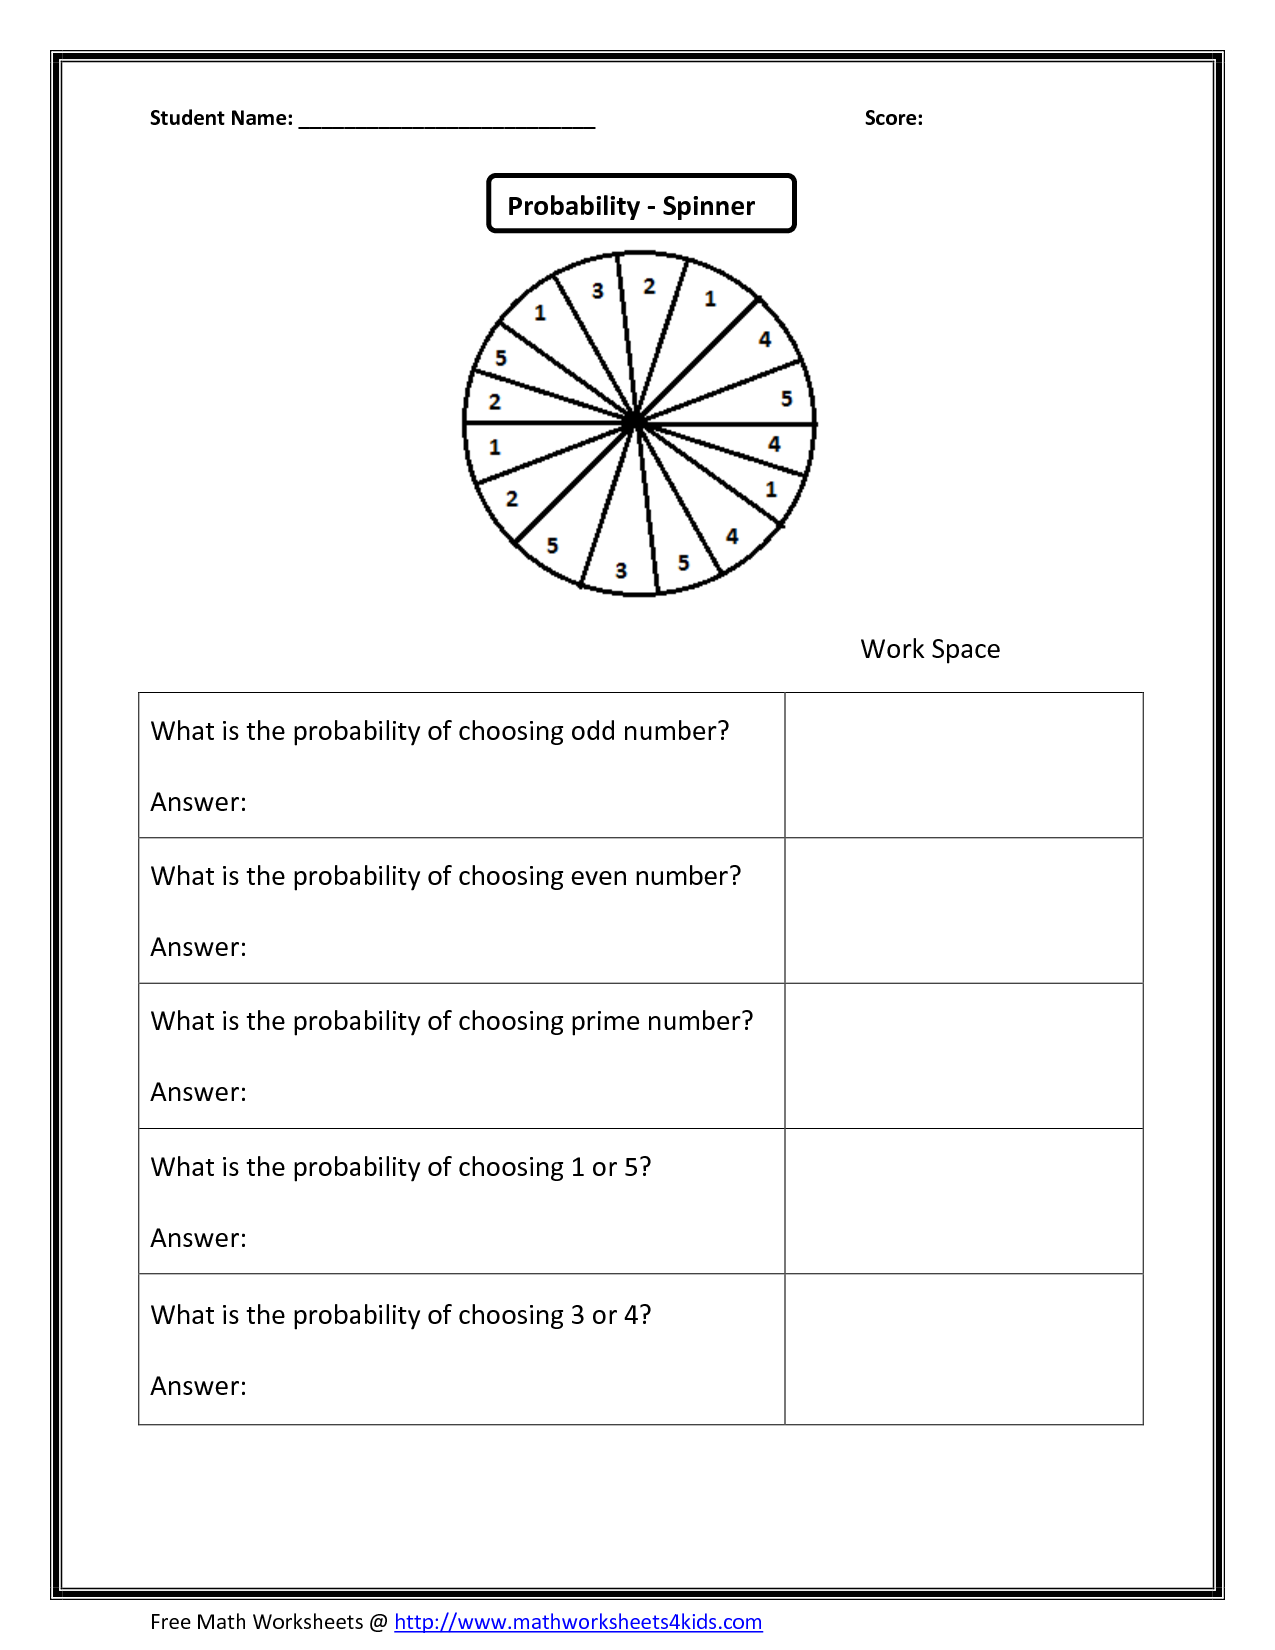 19-best-images-of-compound-probability-worksheet-7th-grade-6th-grade-math-probability